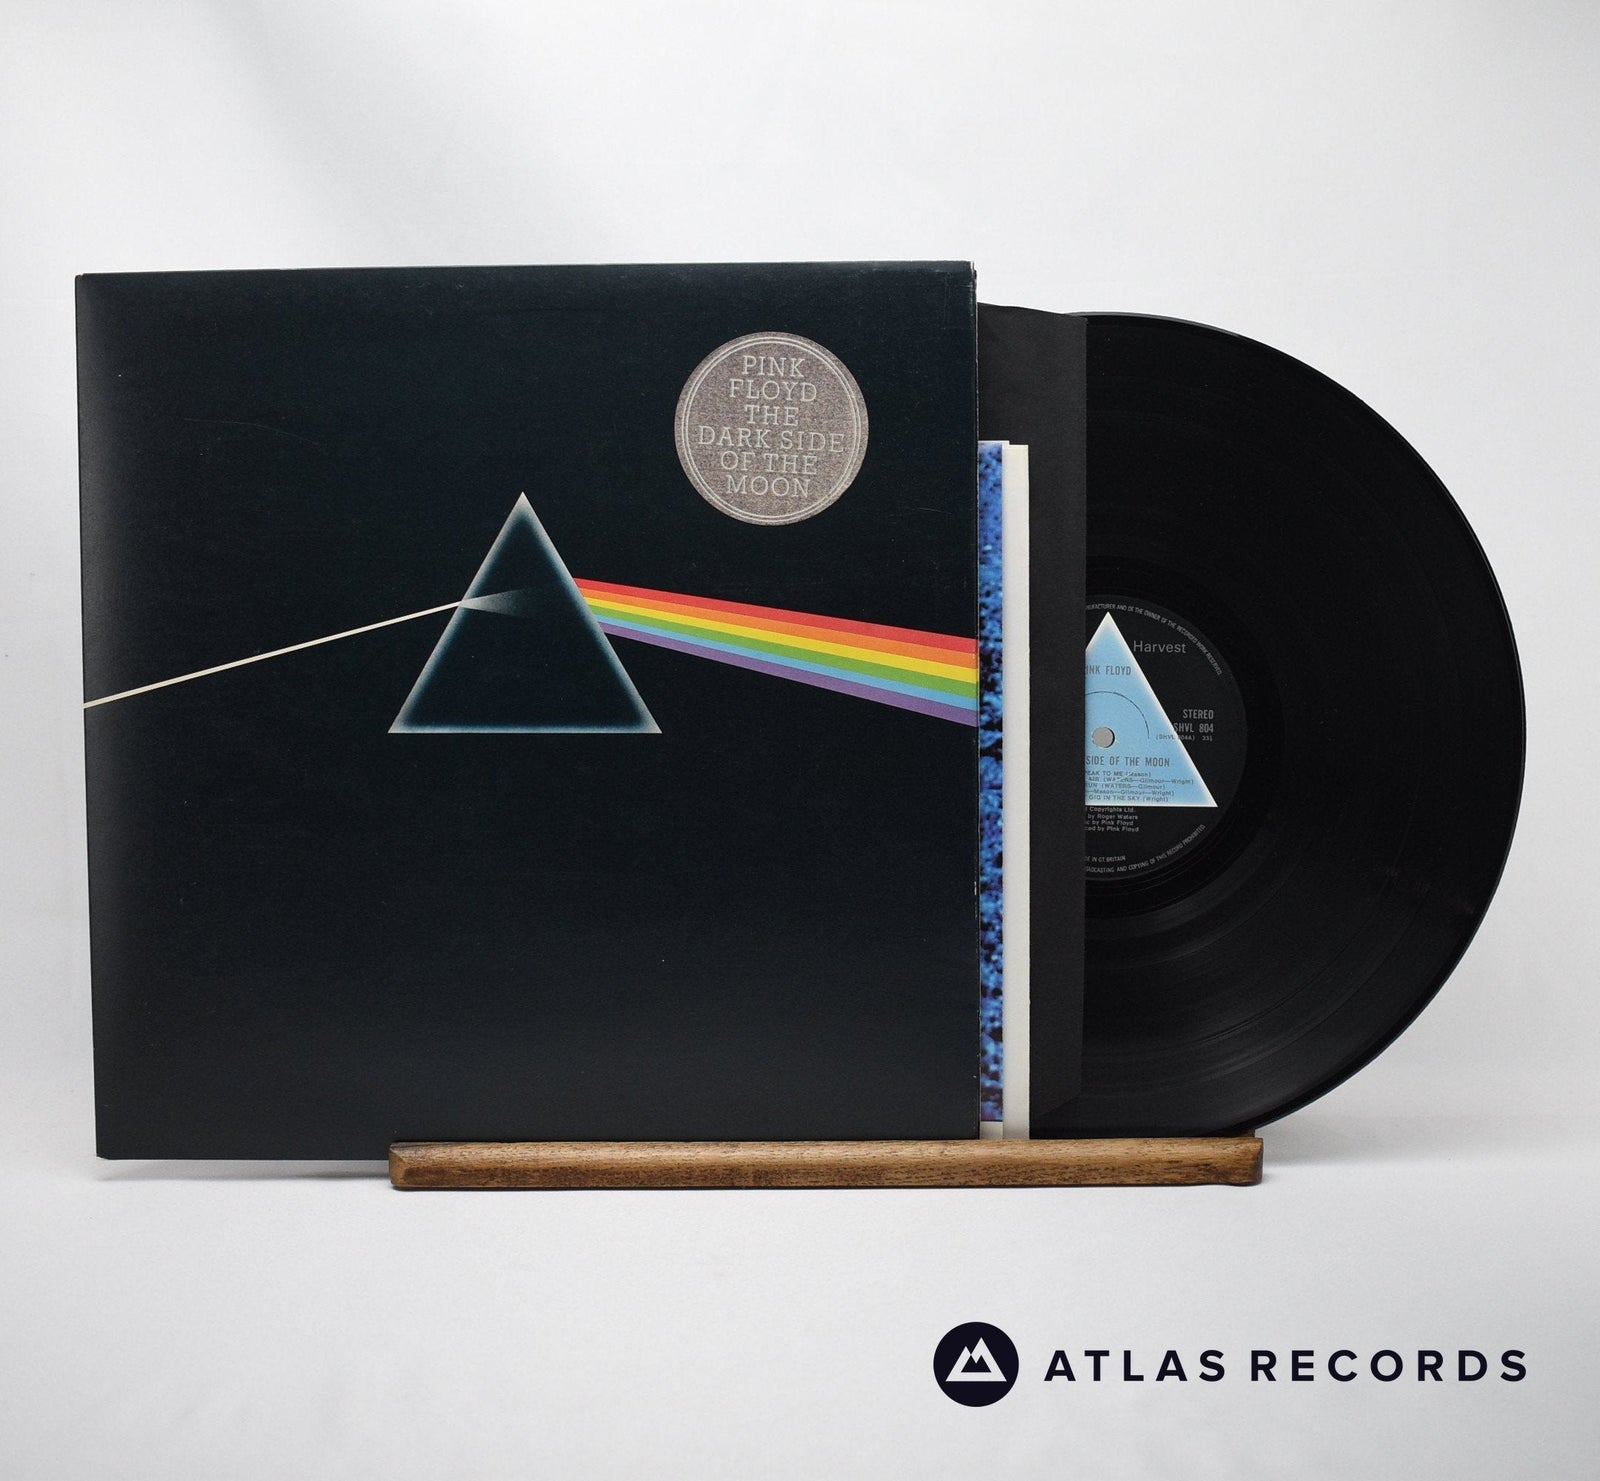 A first press of The Dark Side of the Moon by Pink Floyd